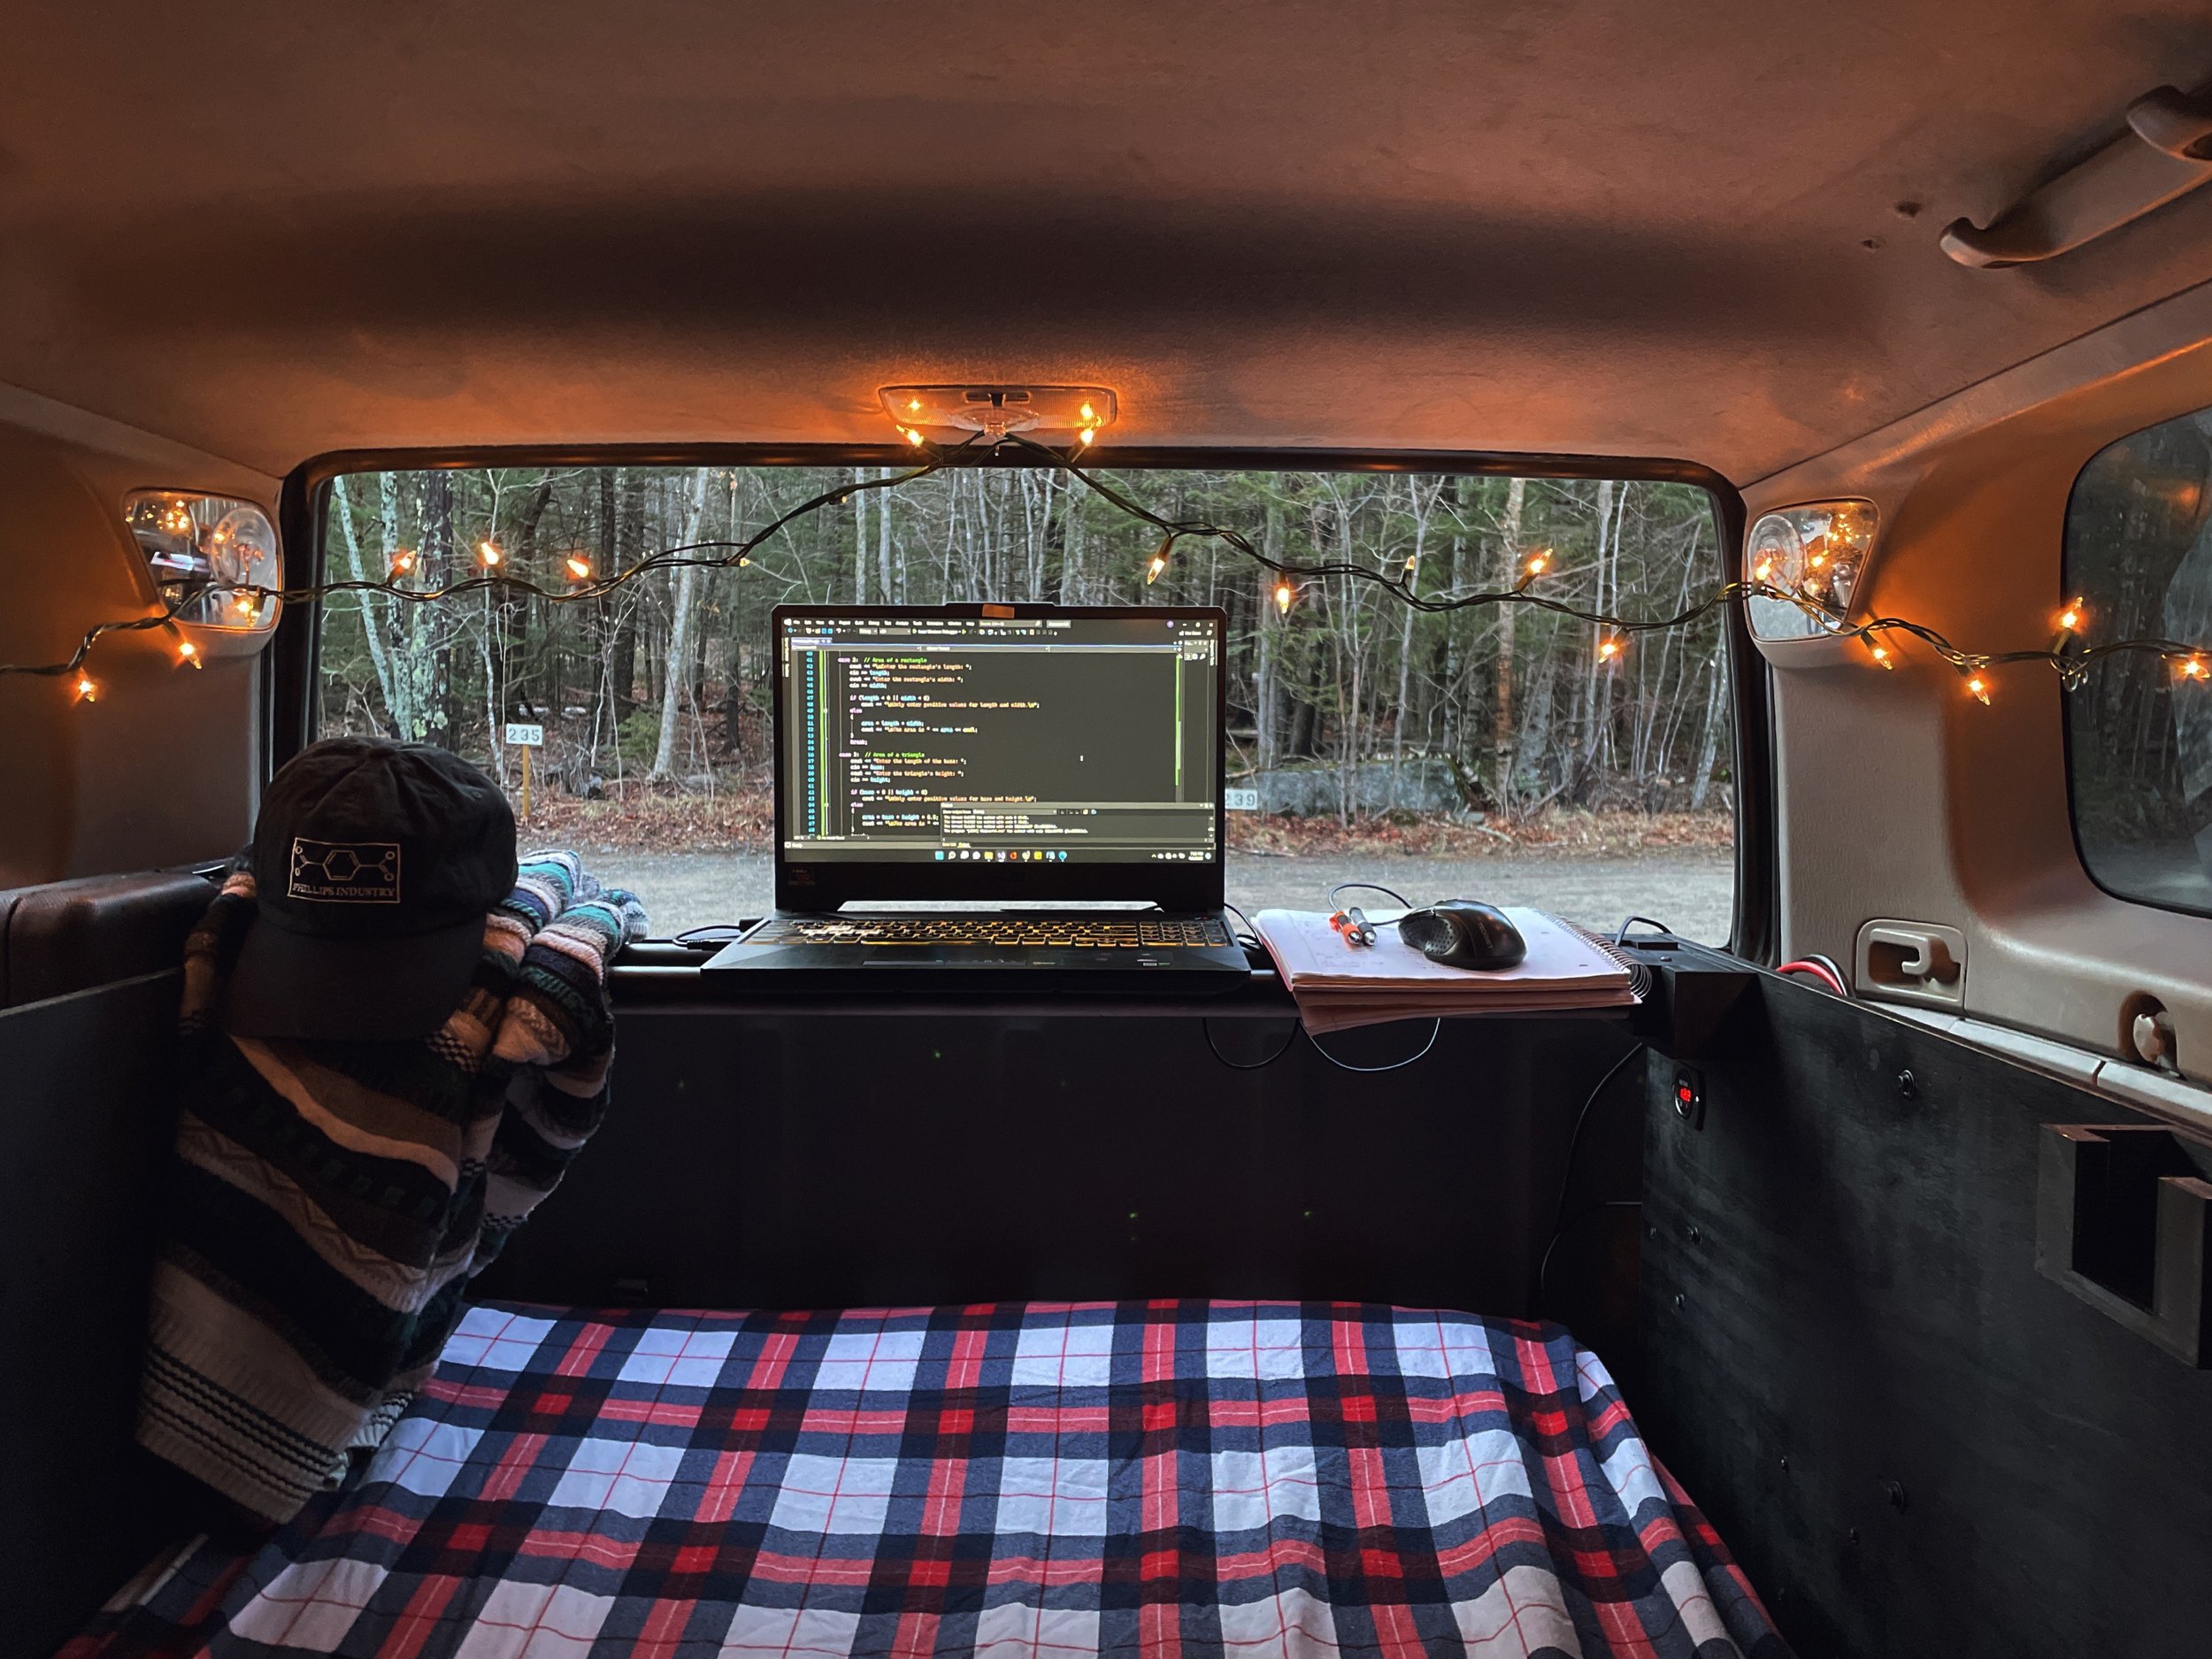 Car camping with solar power